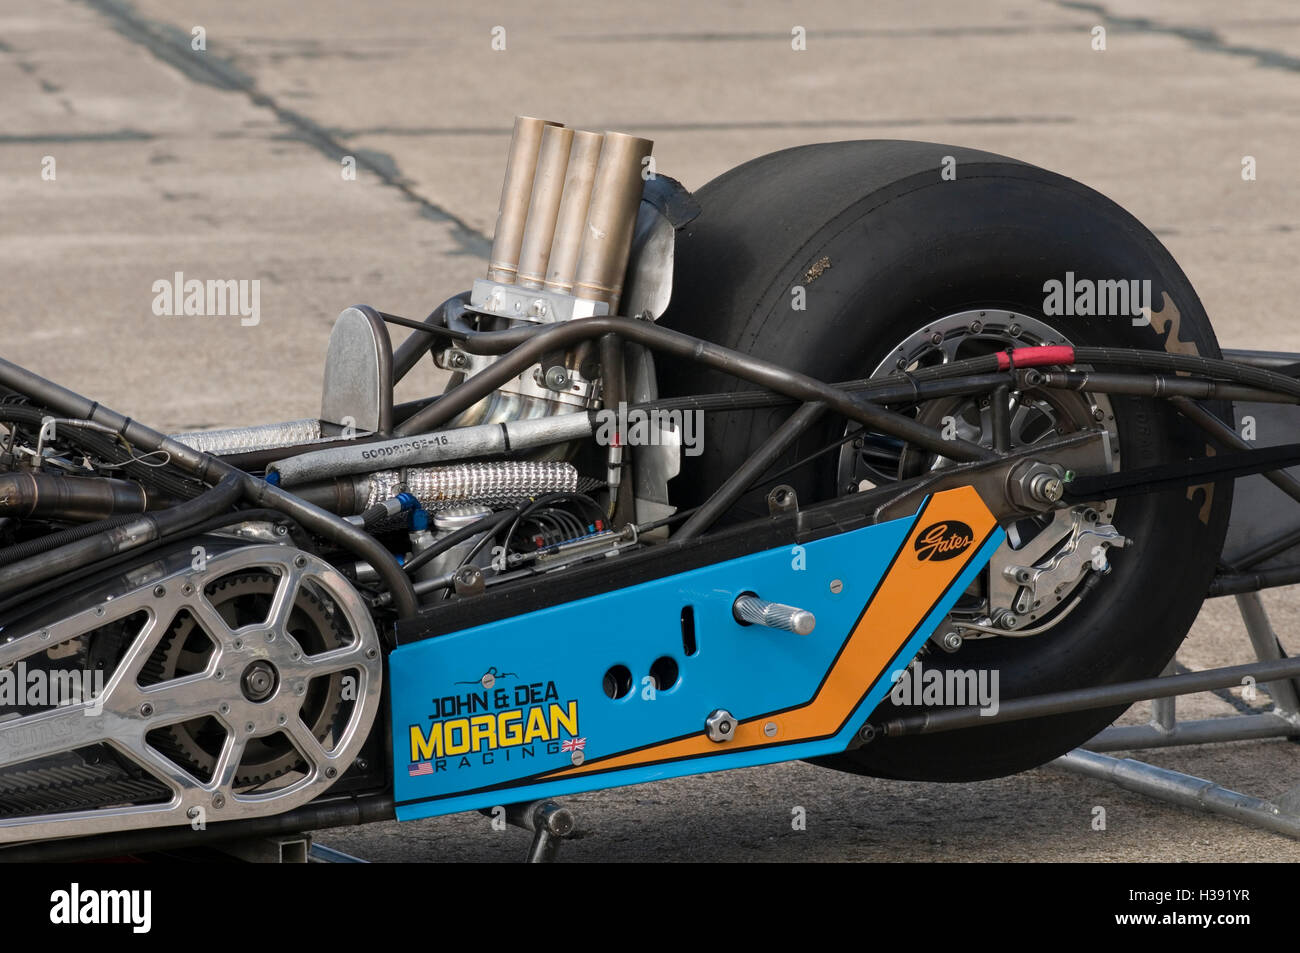 Ian King 10 time European Top Fuel Motorcycle drag racing  champion, slick racing tire and upward pointing exhaust, to produce d Stock Photo